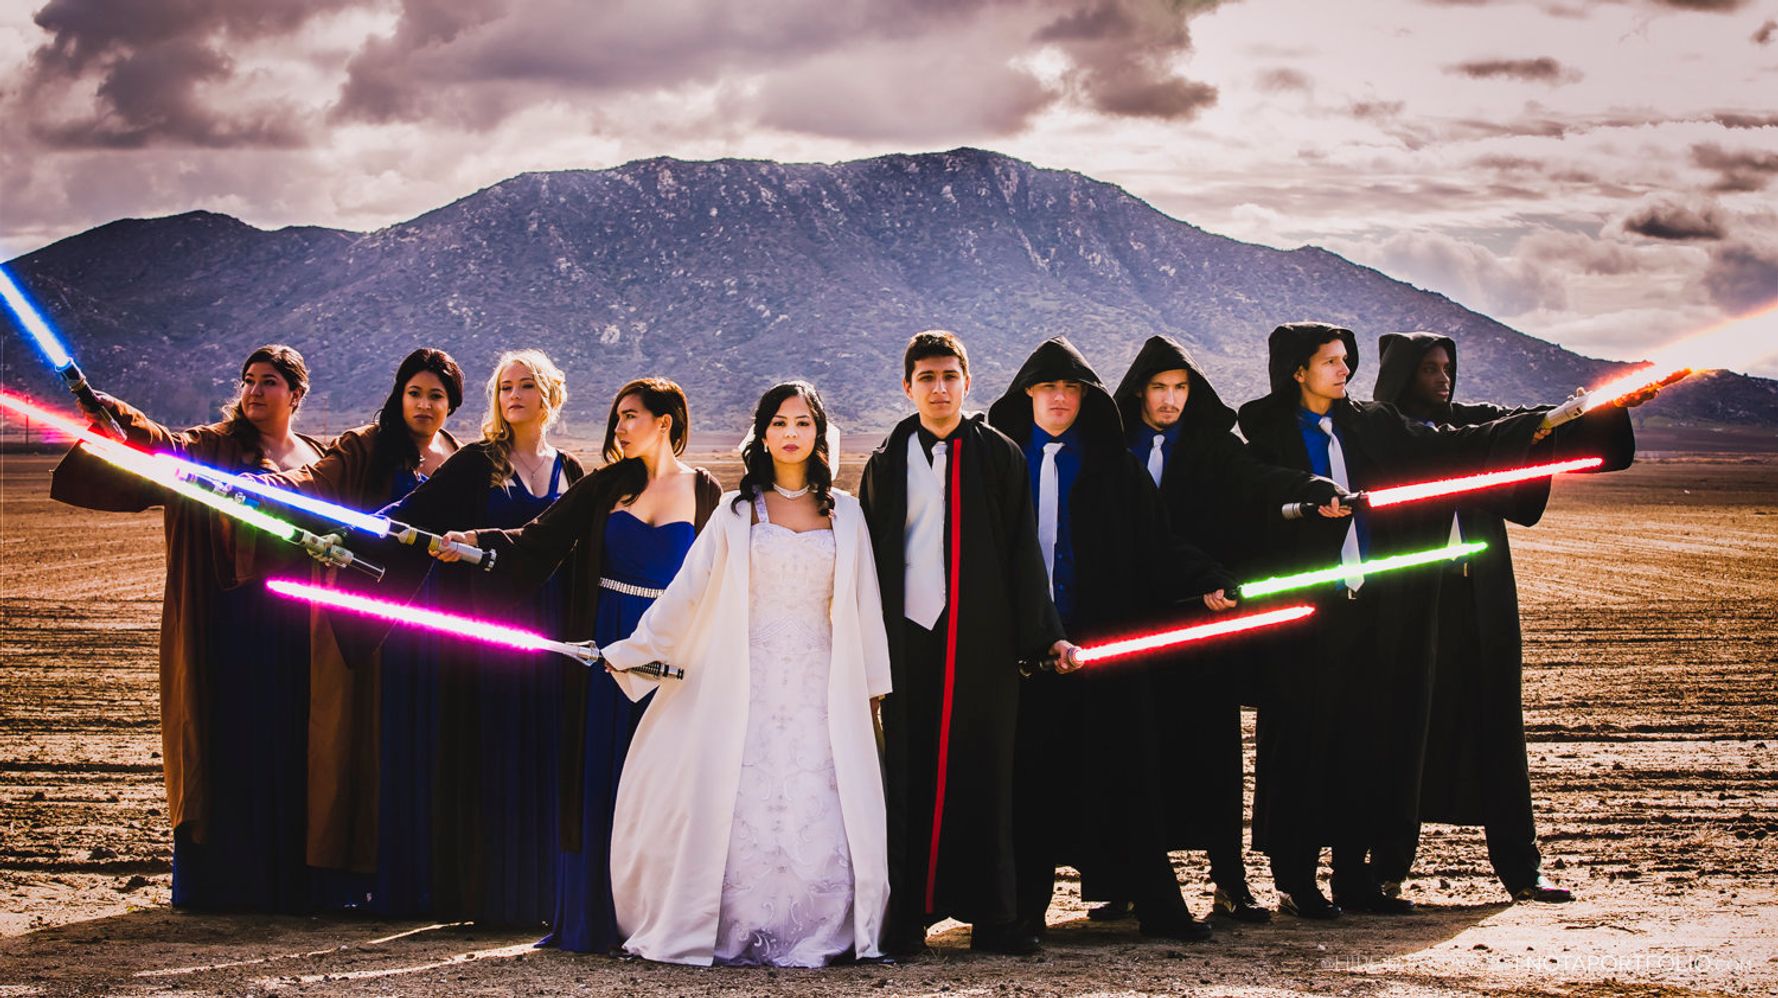 What is a Cosplay Wedding?